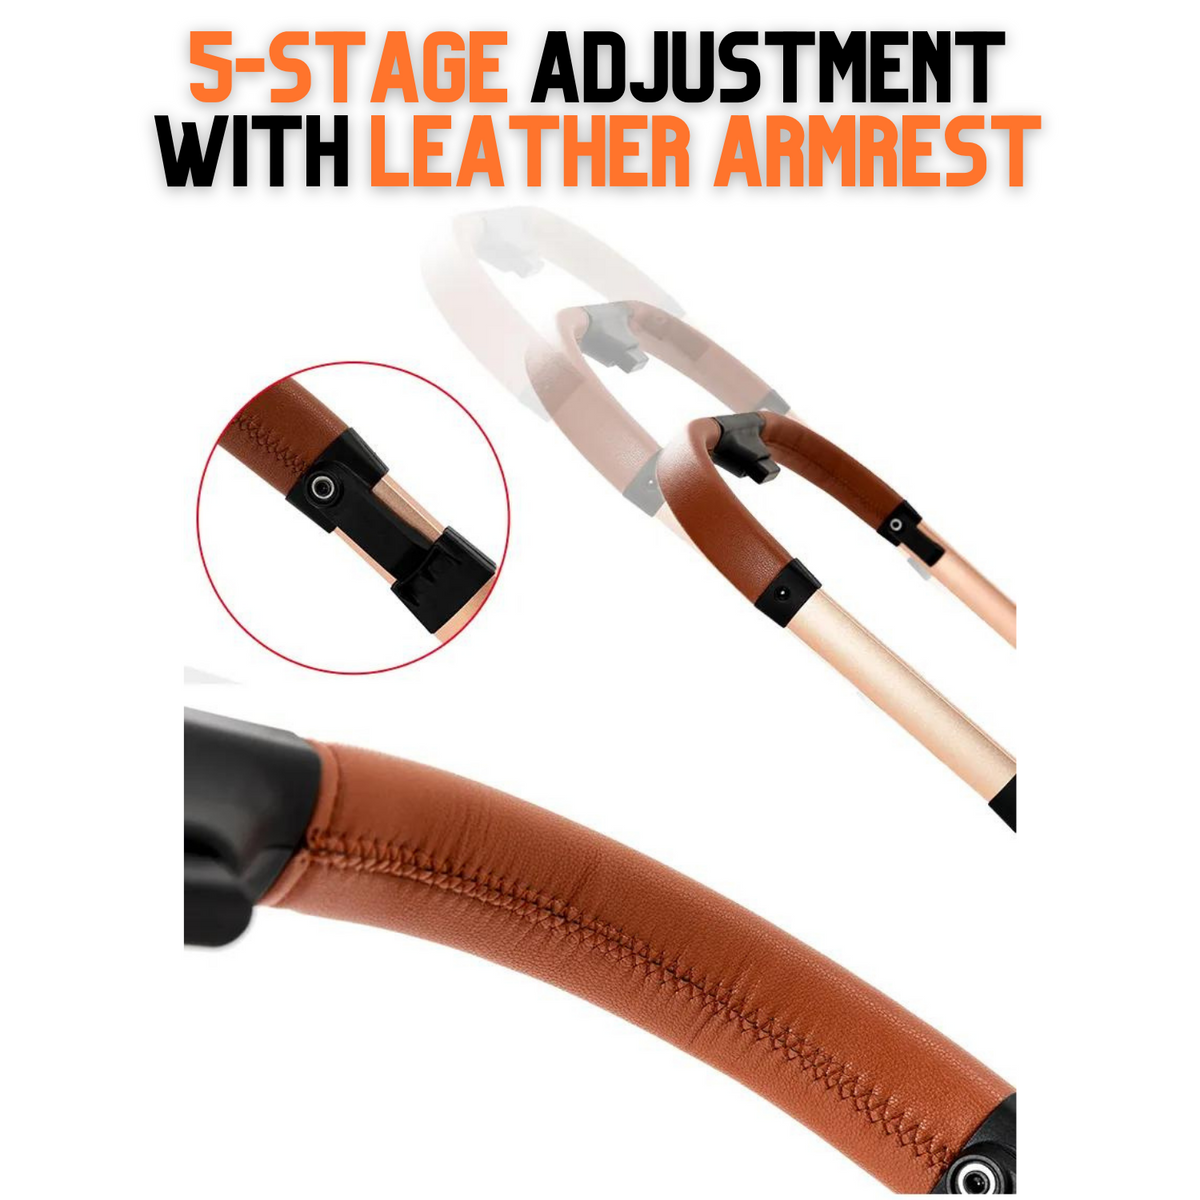 5 stage adjustment with leather armrest